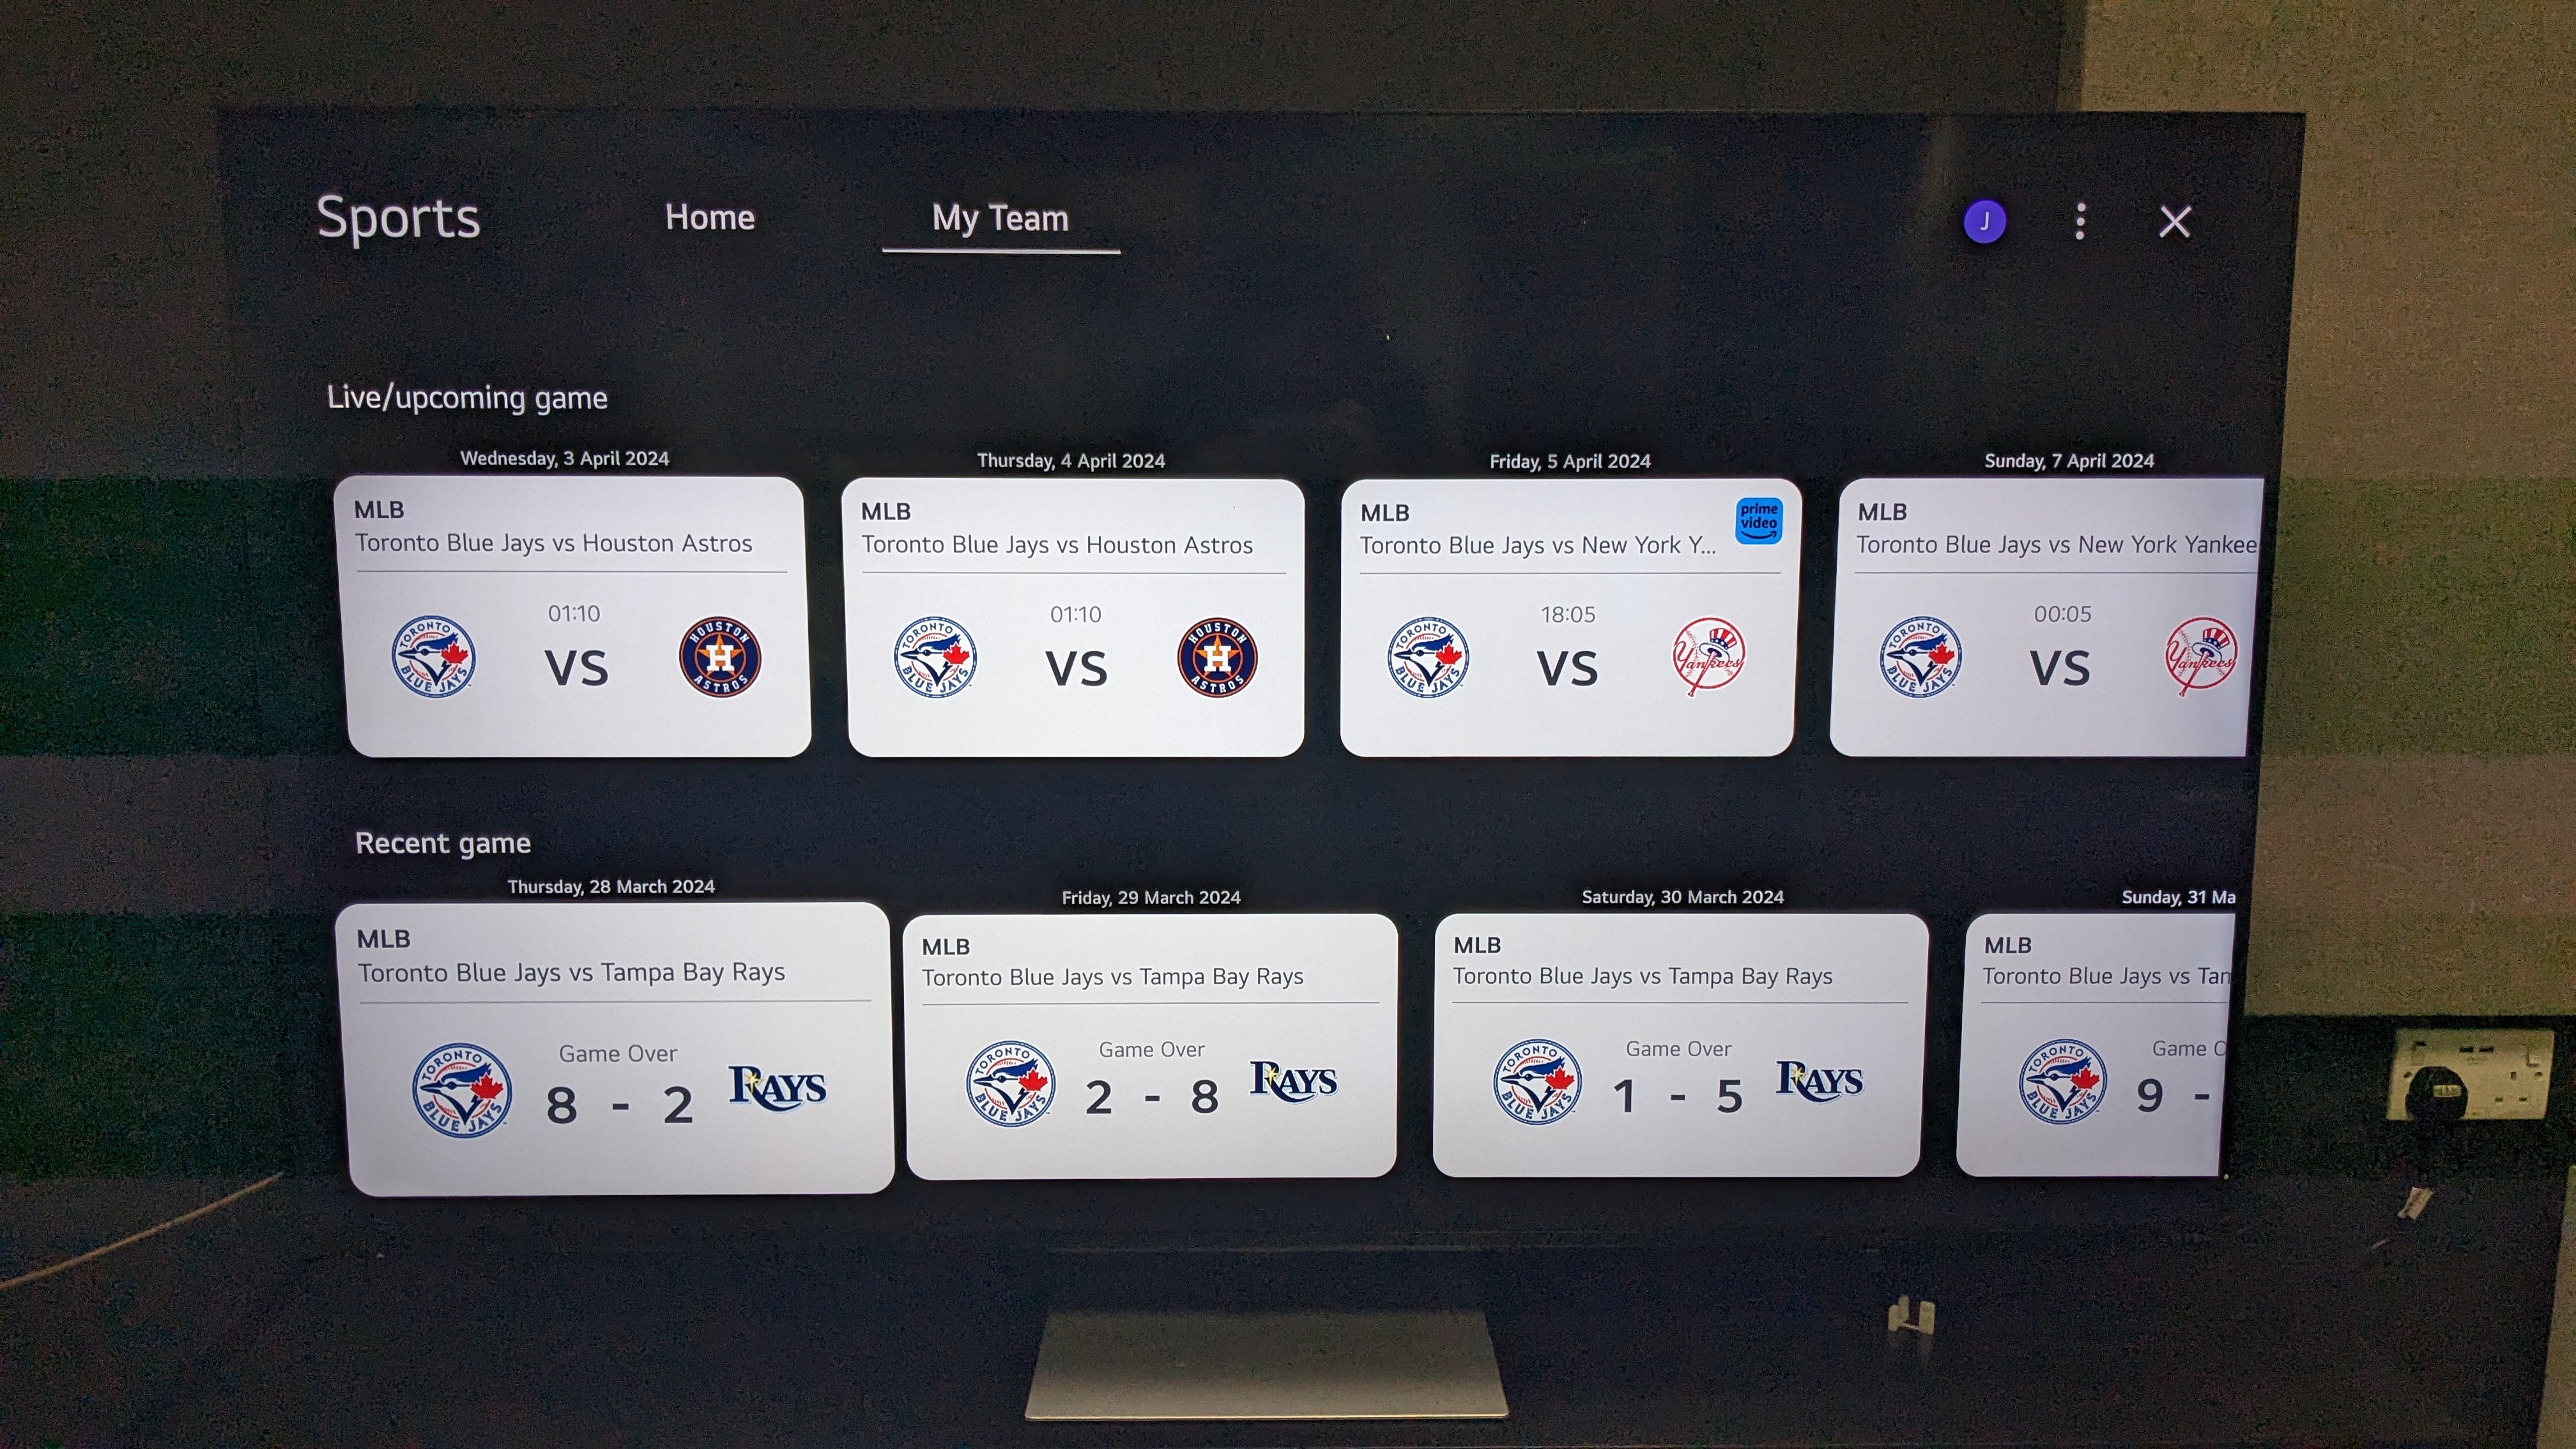 Sports page on LG webOS24